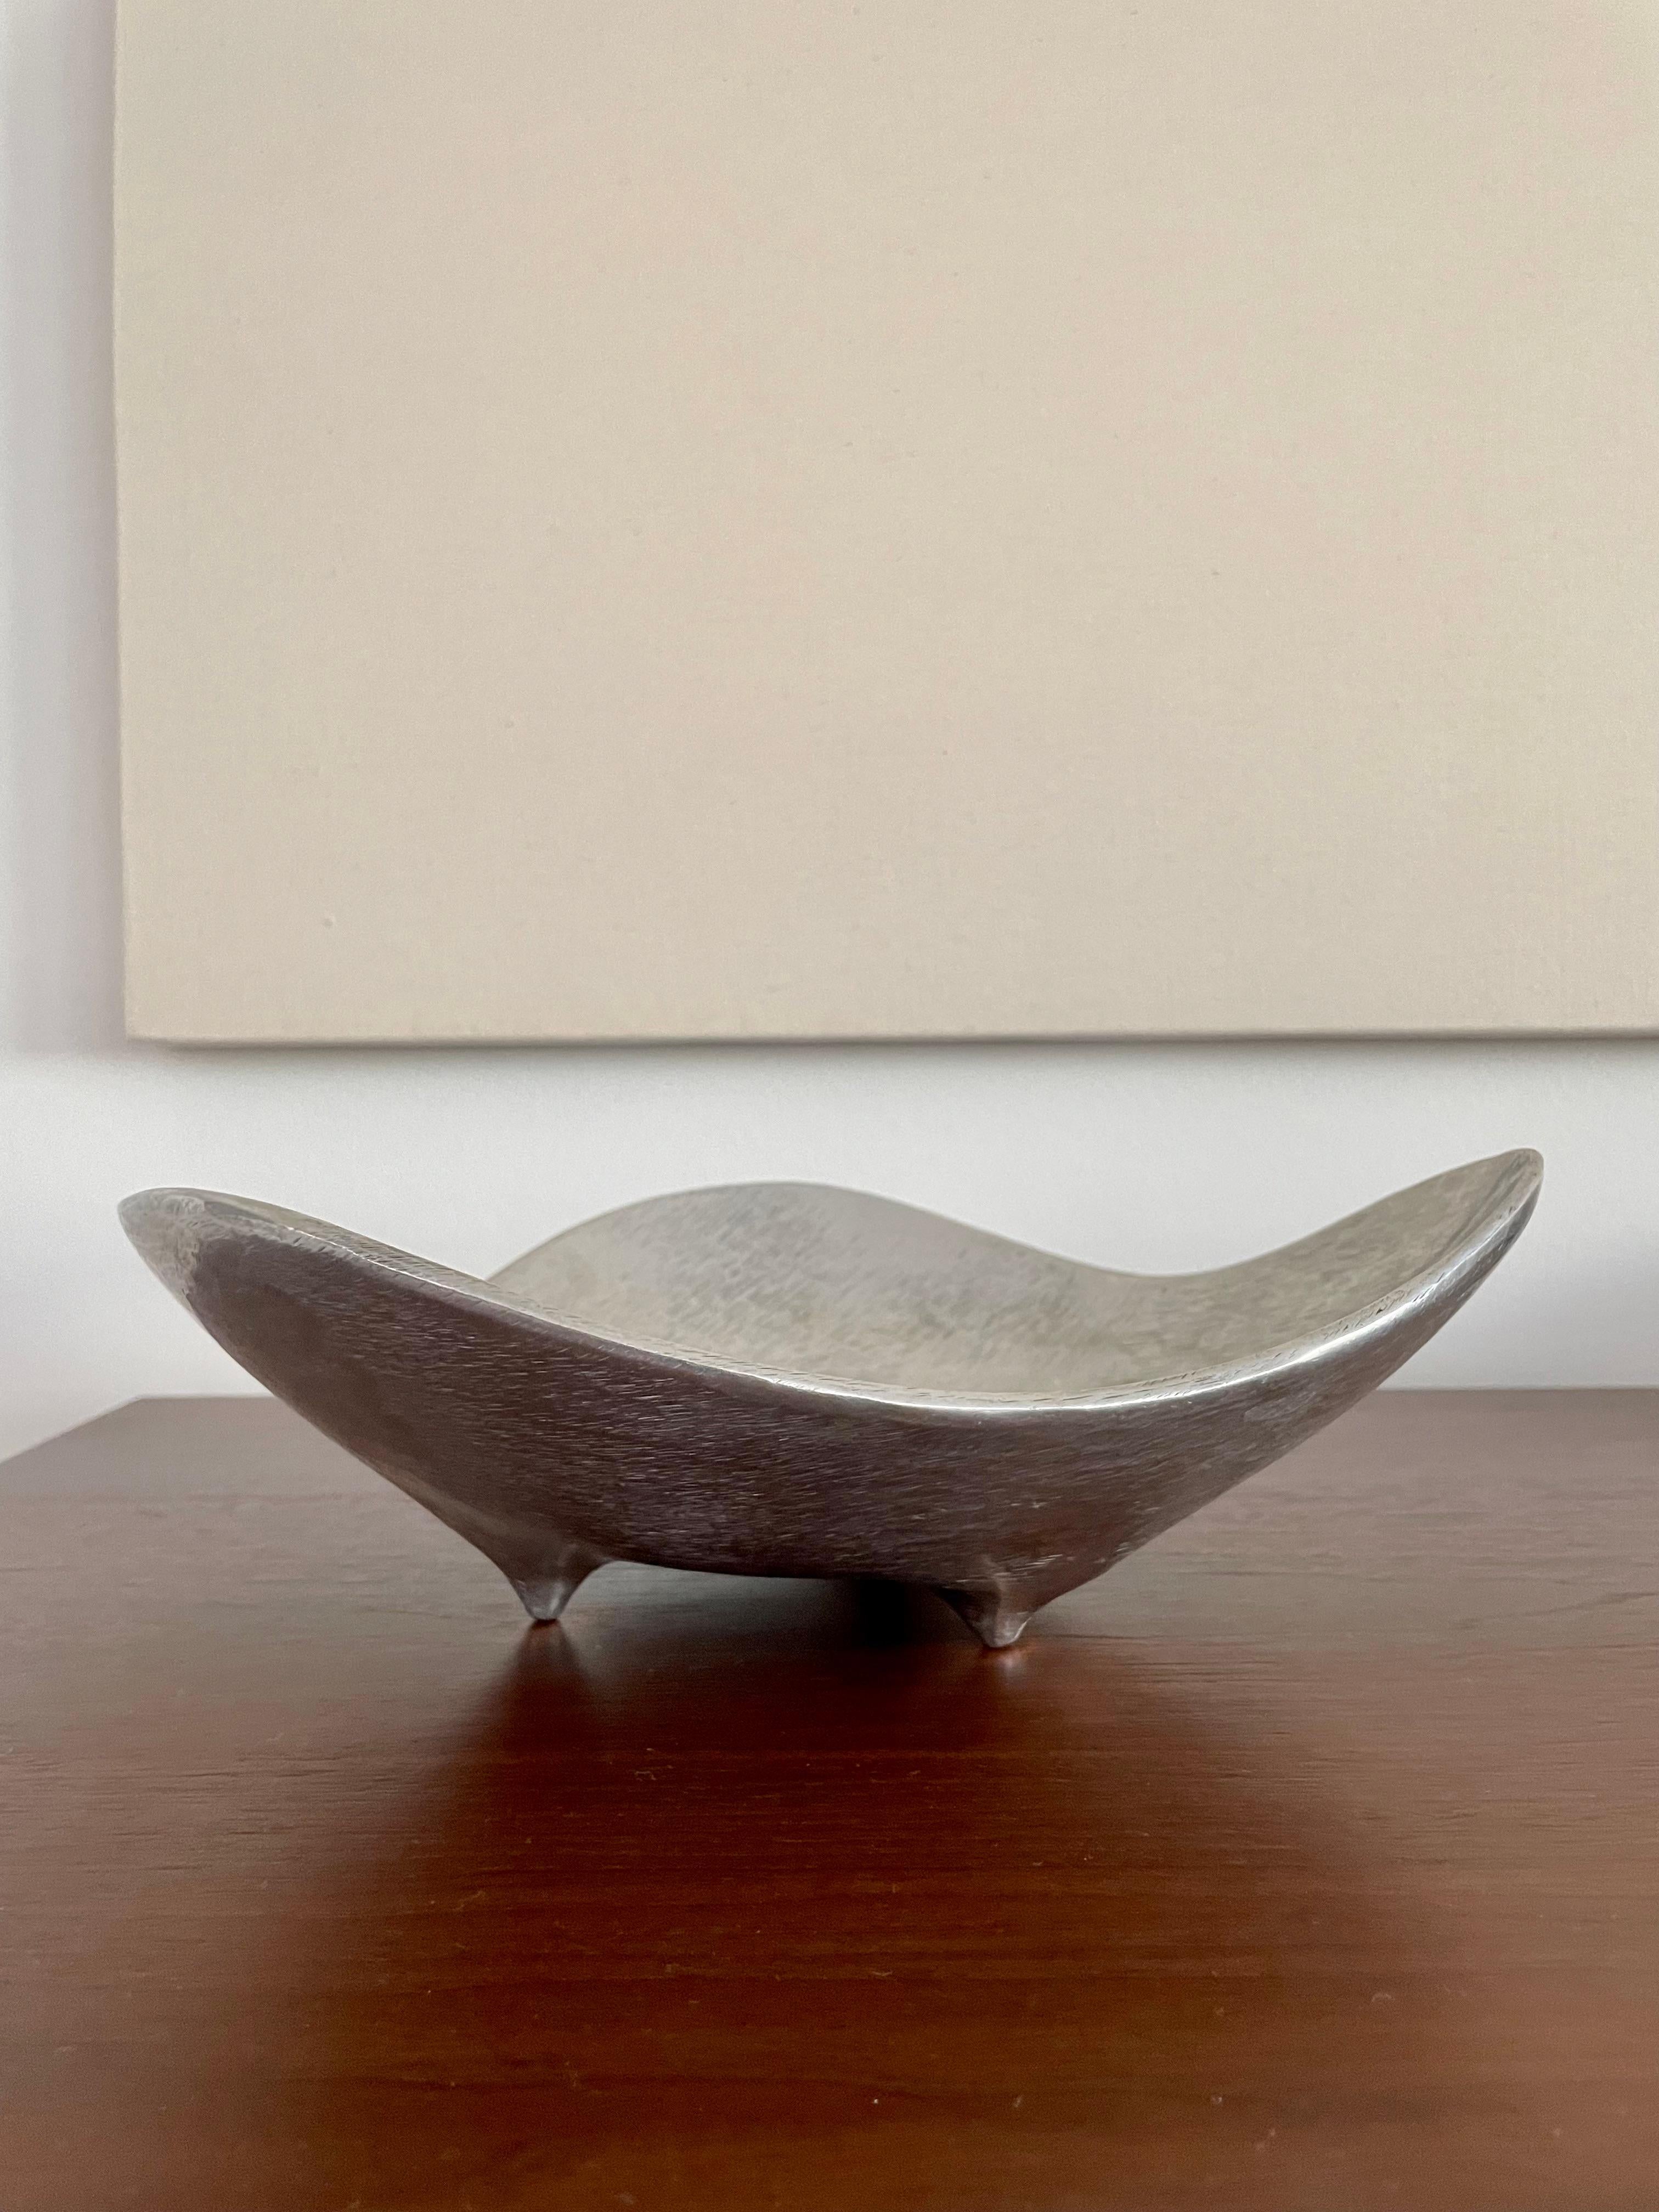 Biomorphic bowl by Bruce C. Fox, 1960s.

Cast and polished aluminum bowl with etchings.

Signed on the underside.